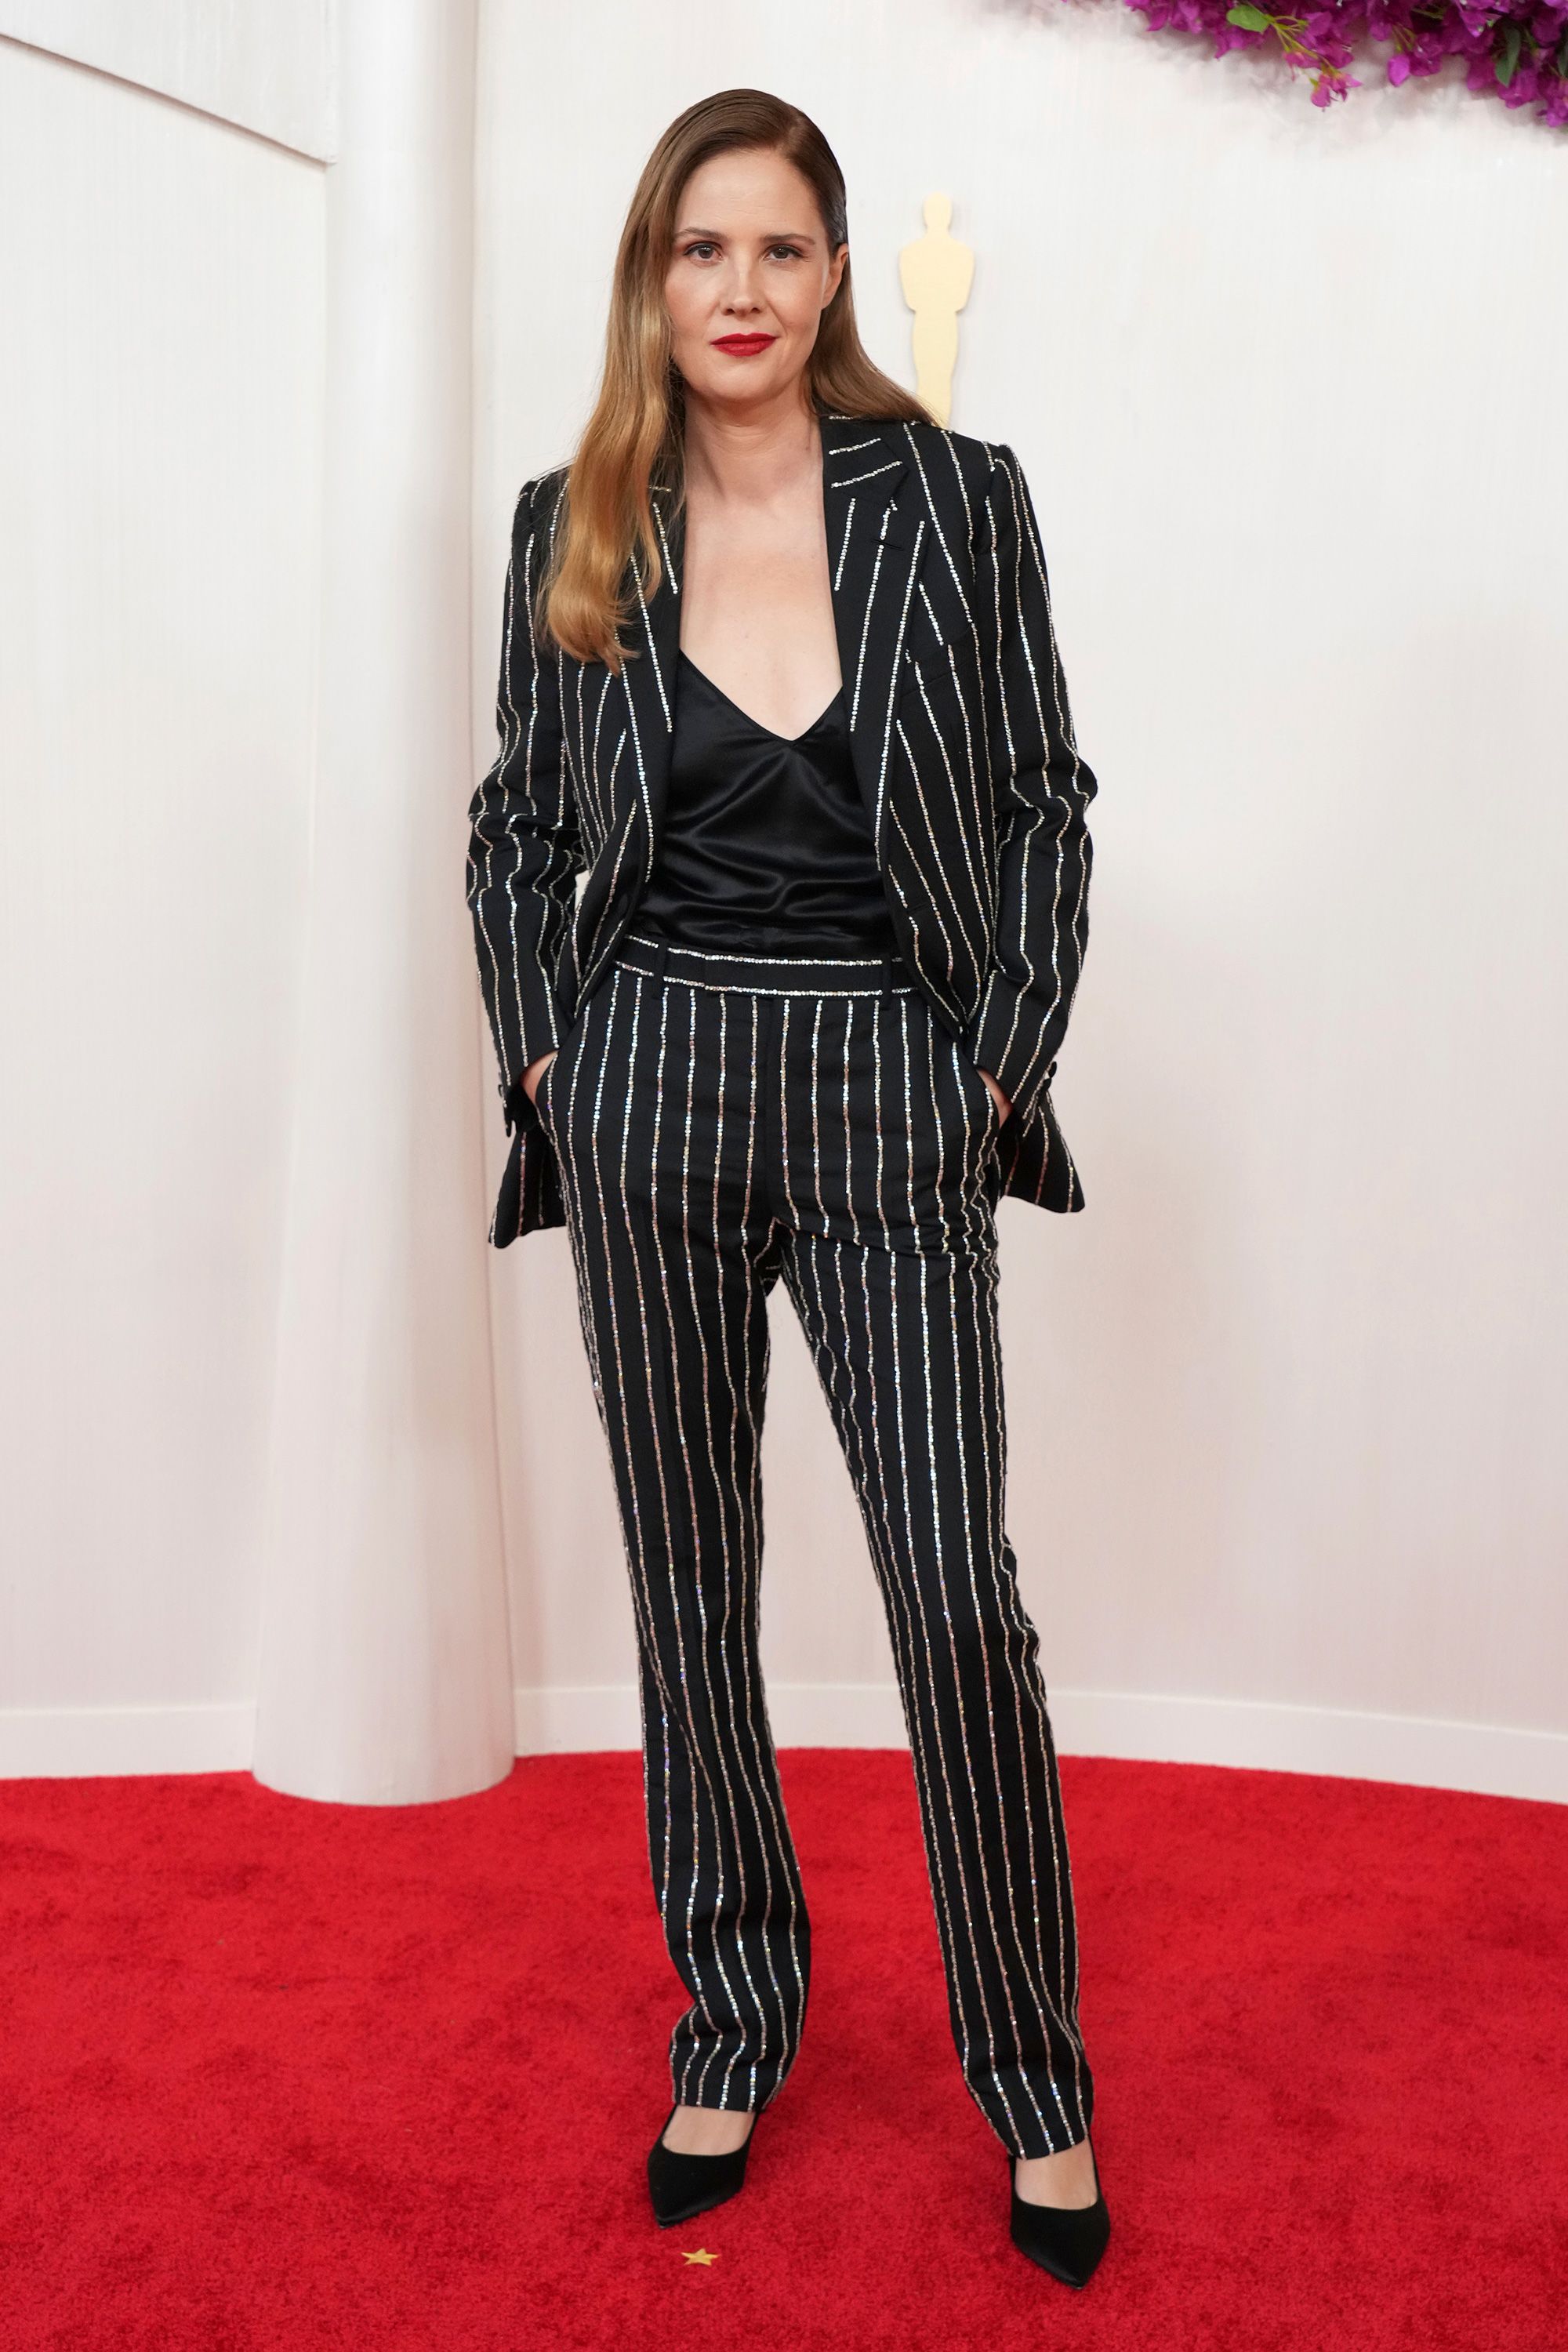 Justine Tritt, who later took home a Best Original Screenplay Oscar for Anatomy of a Fall, wore a bright striped Louis Vuitton suit.